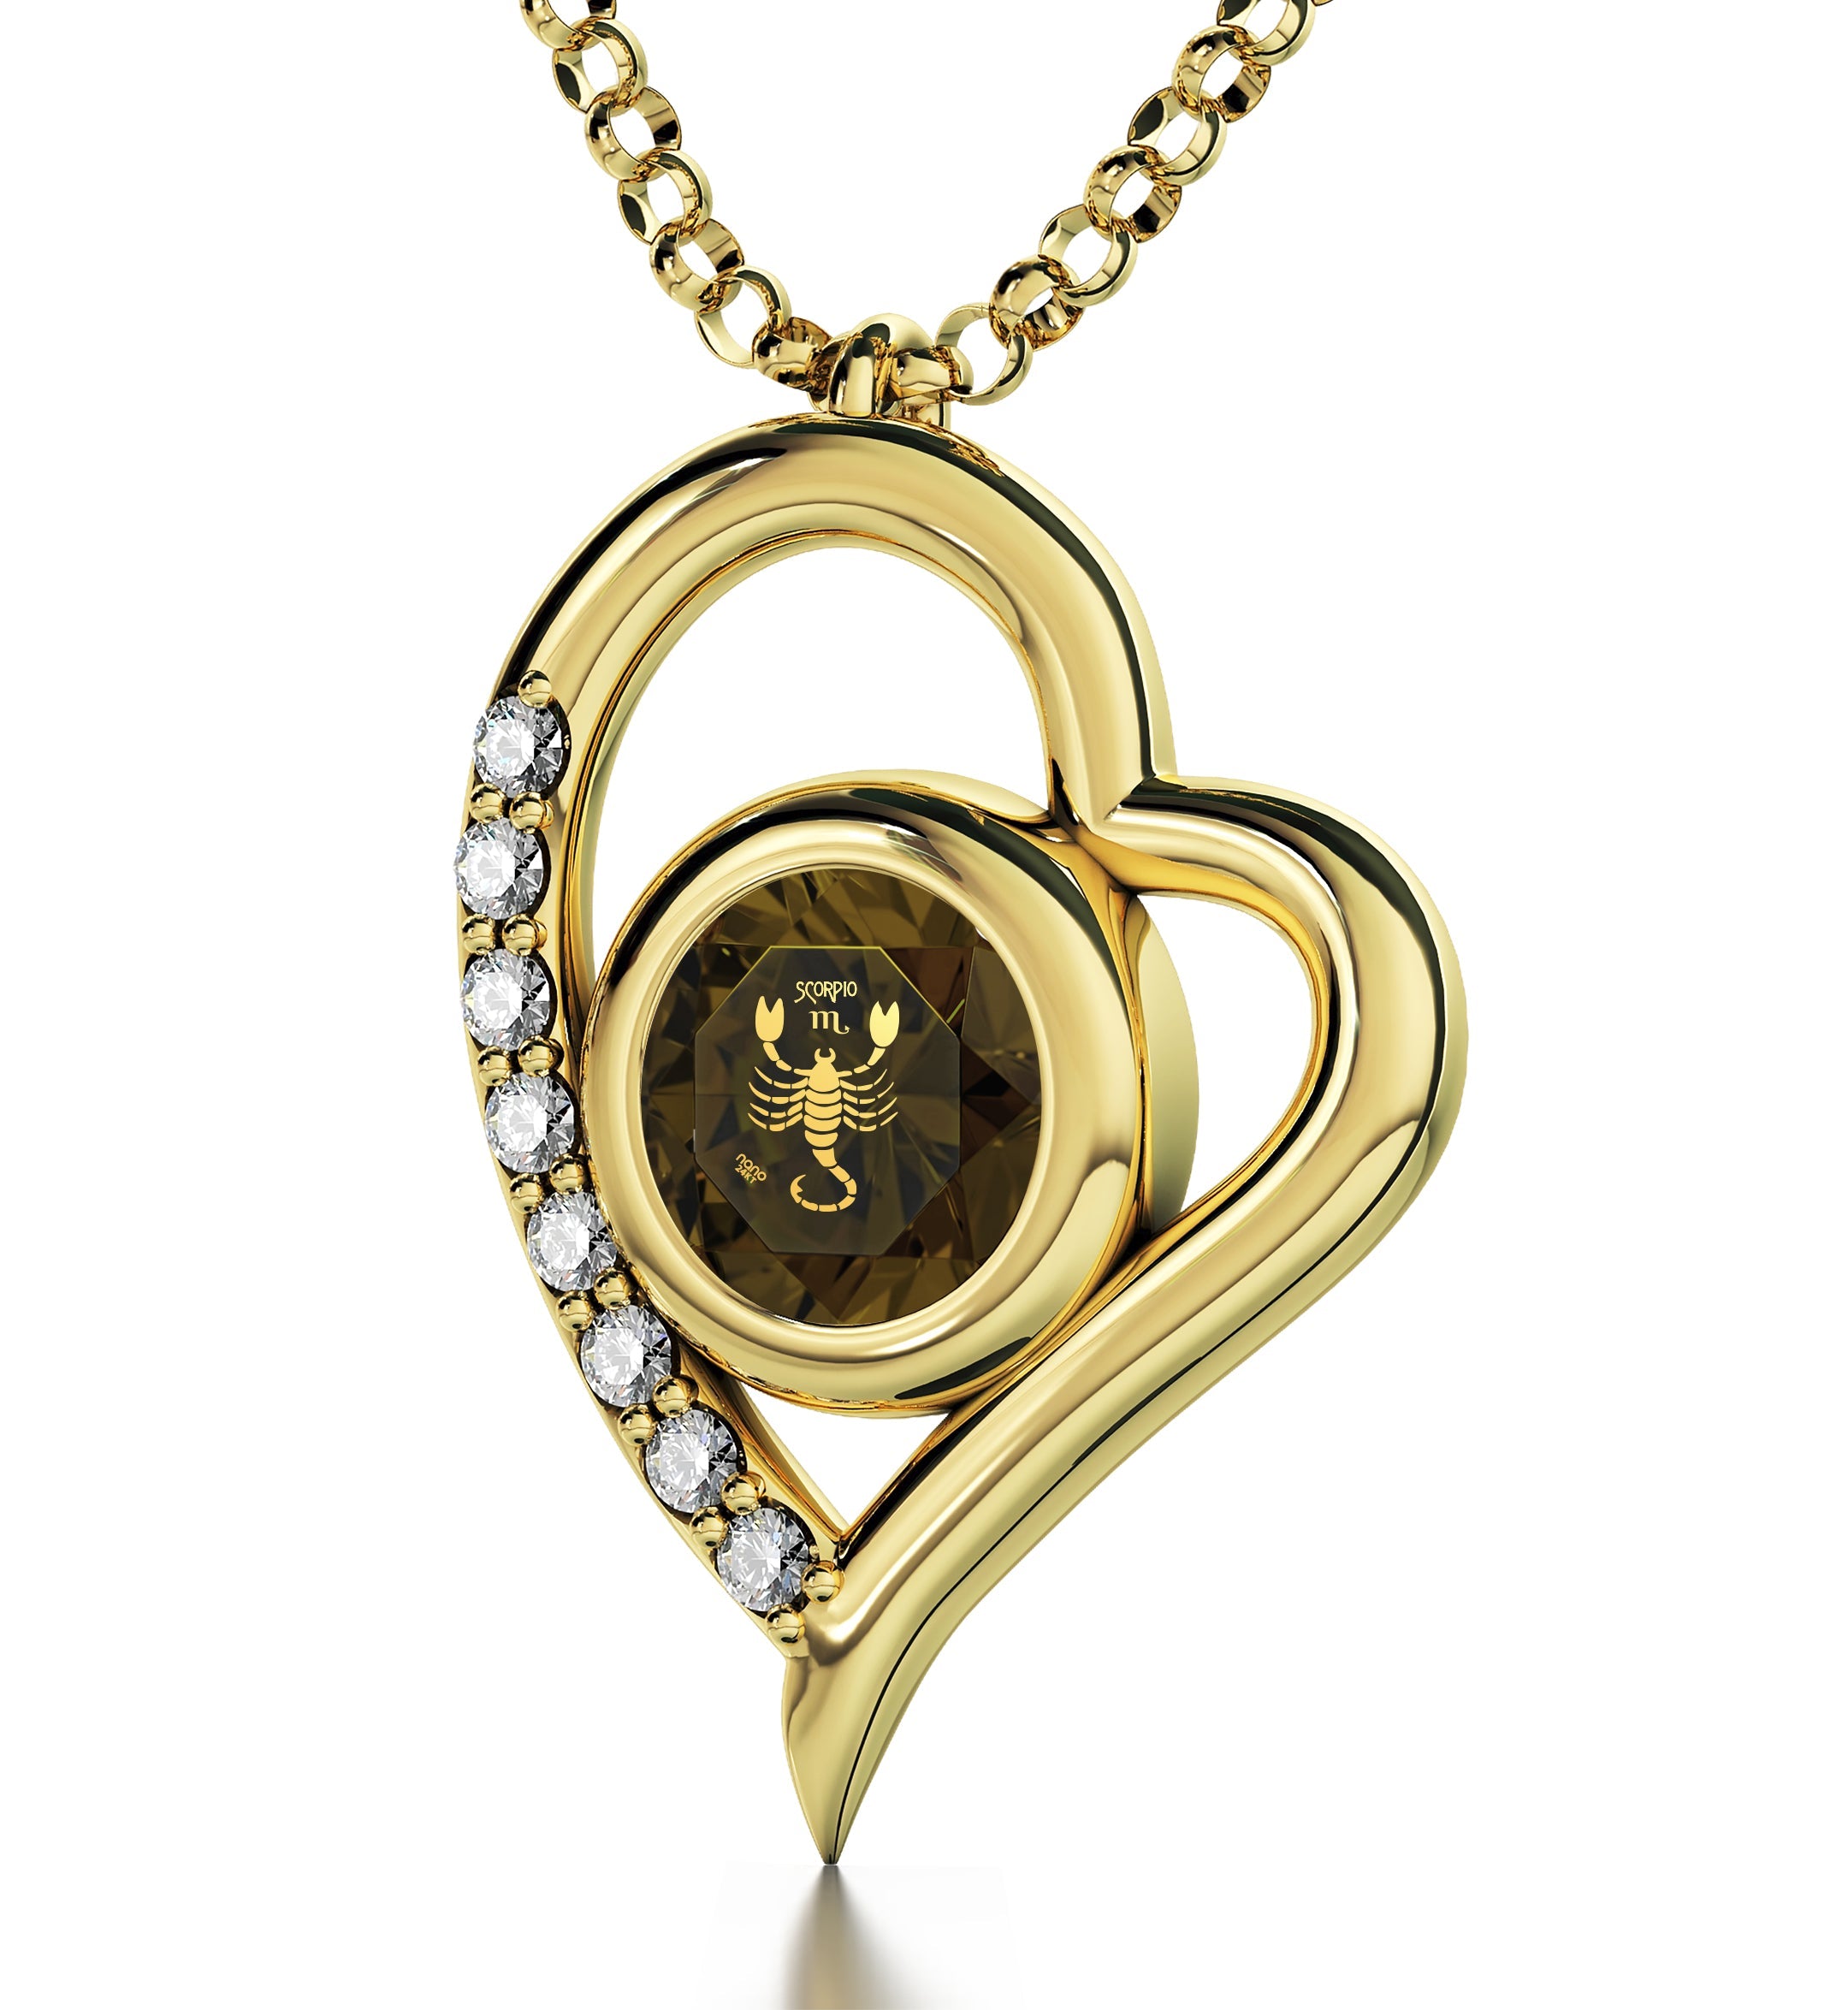 Gold Plated Silver Scorpio Necklace Zodiac Heart Pendant with Swarovski Crystals, on a gold chain, bearing inscriptions on a small attached tag.